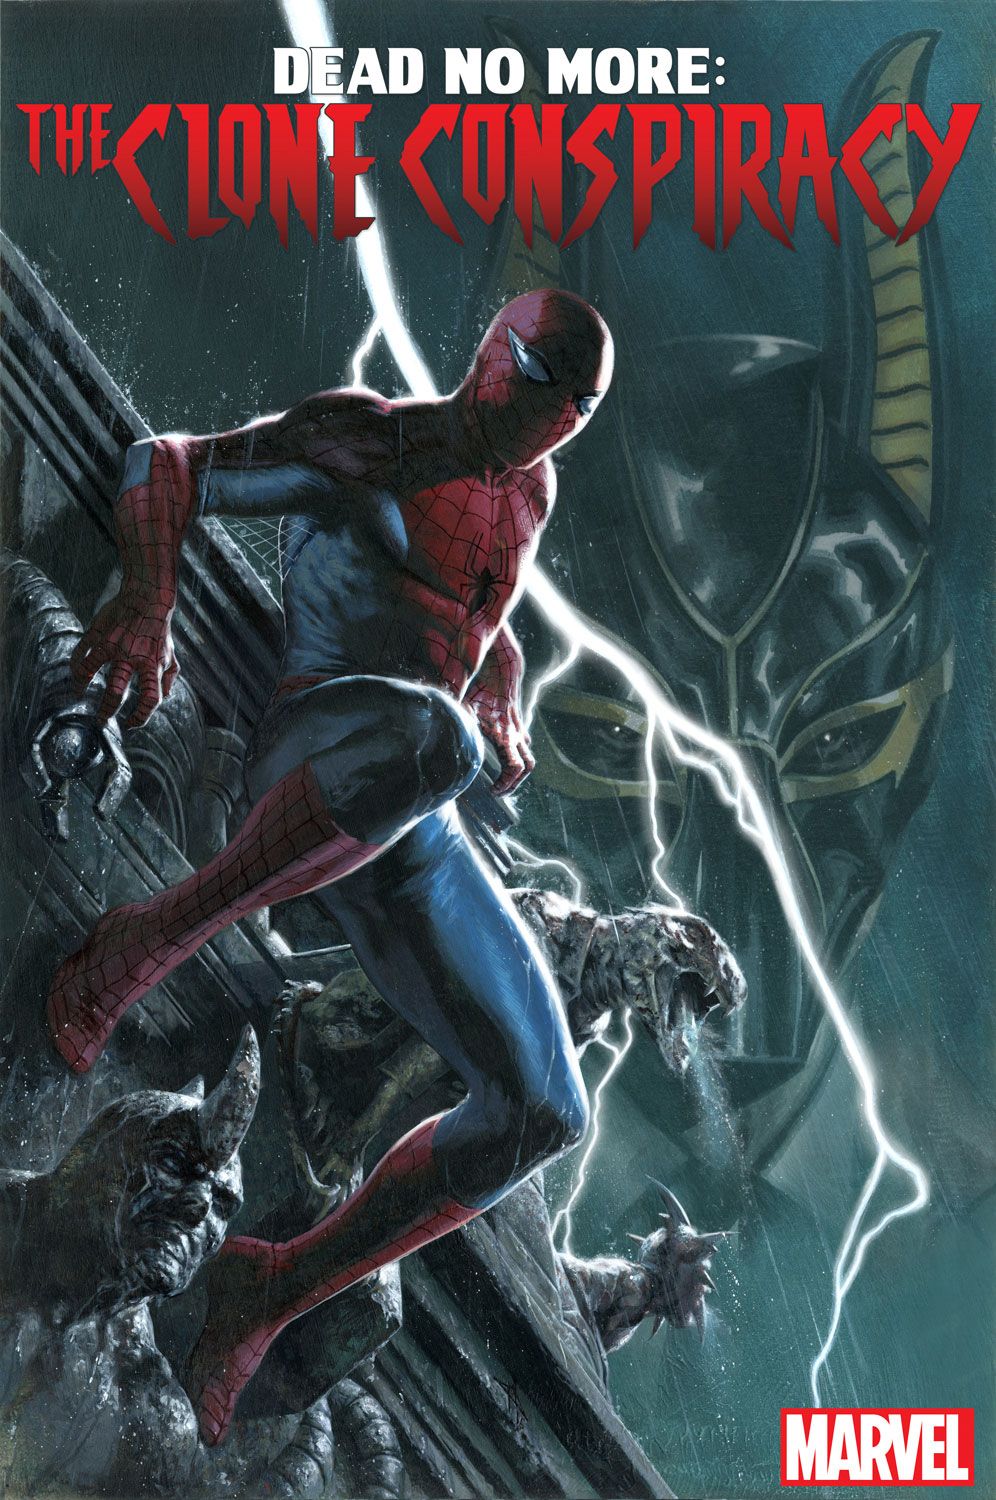 The Clone Conspiracy #1 cover by Gabriele Dell’Otto.